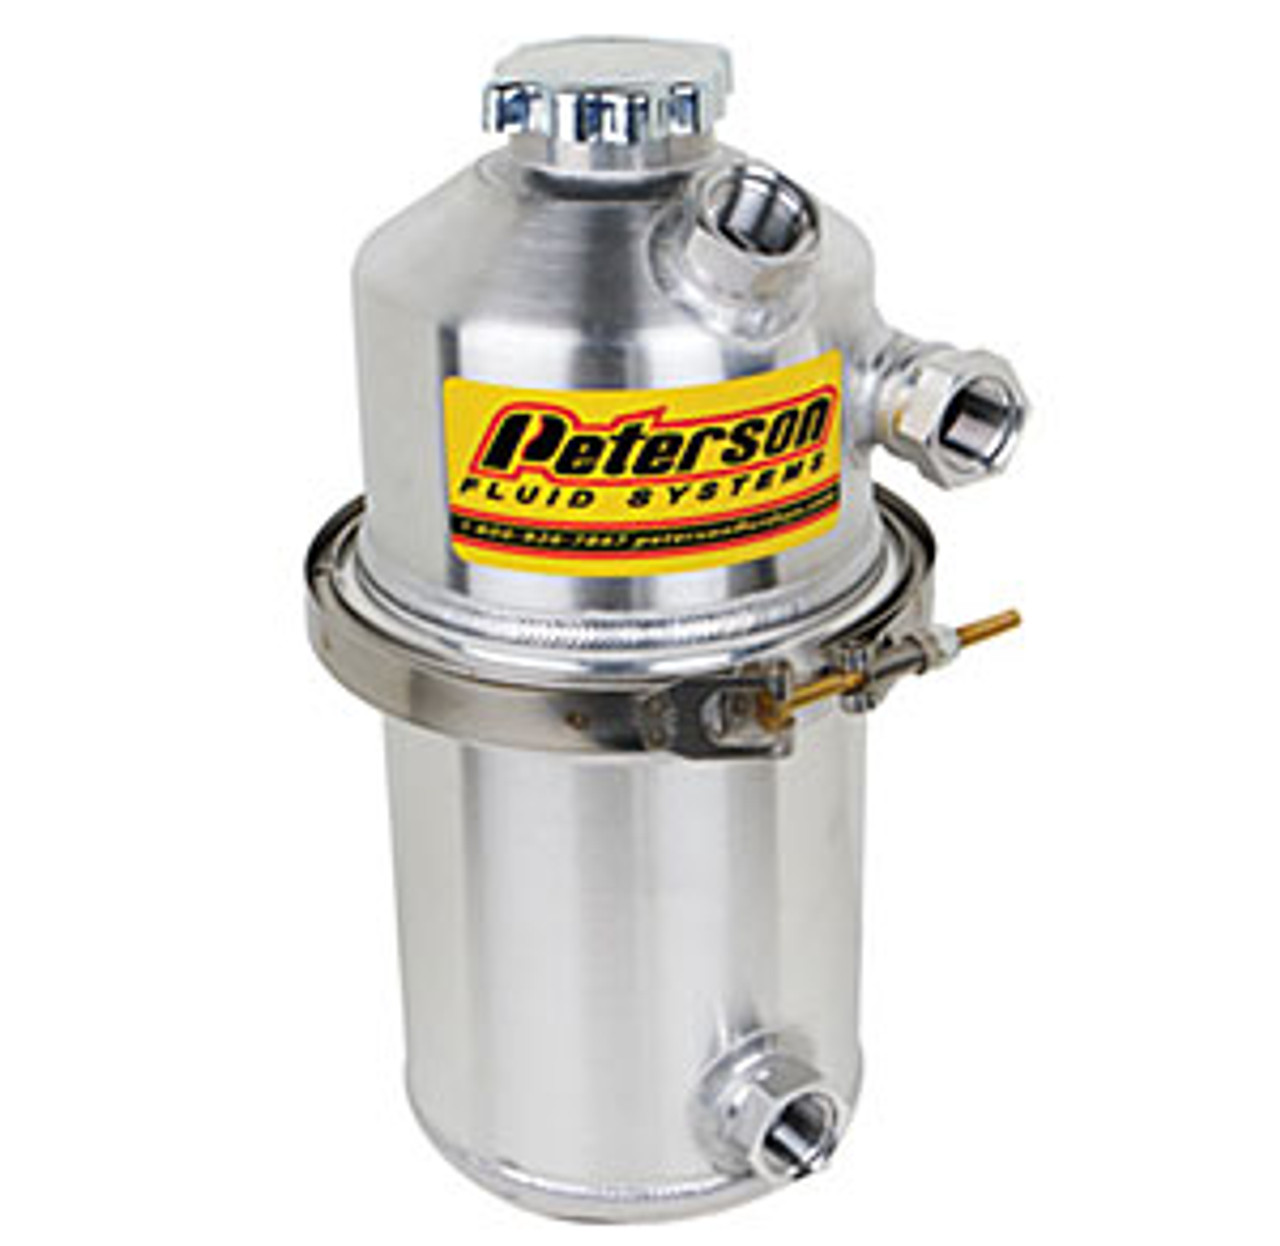 Peterson Dry Sump Tank 1.5 Gal -12an Male Fittings - PTR08-0023